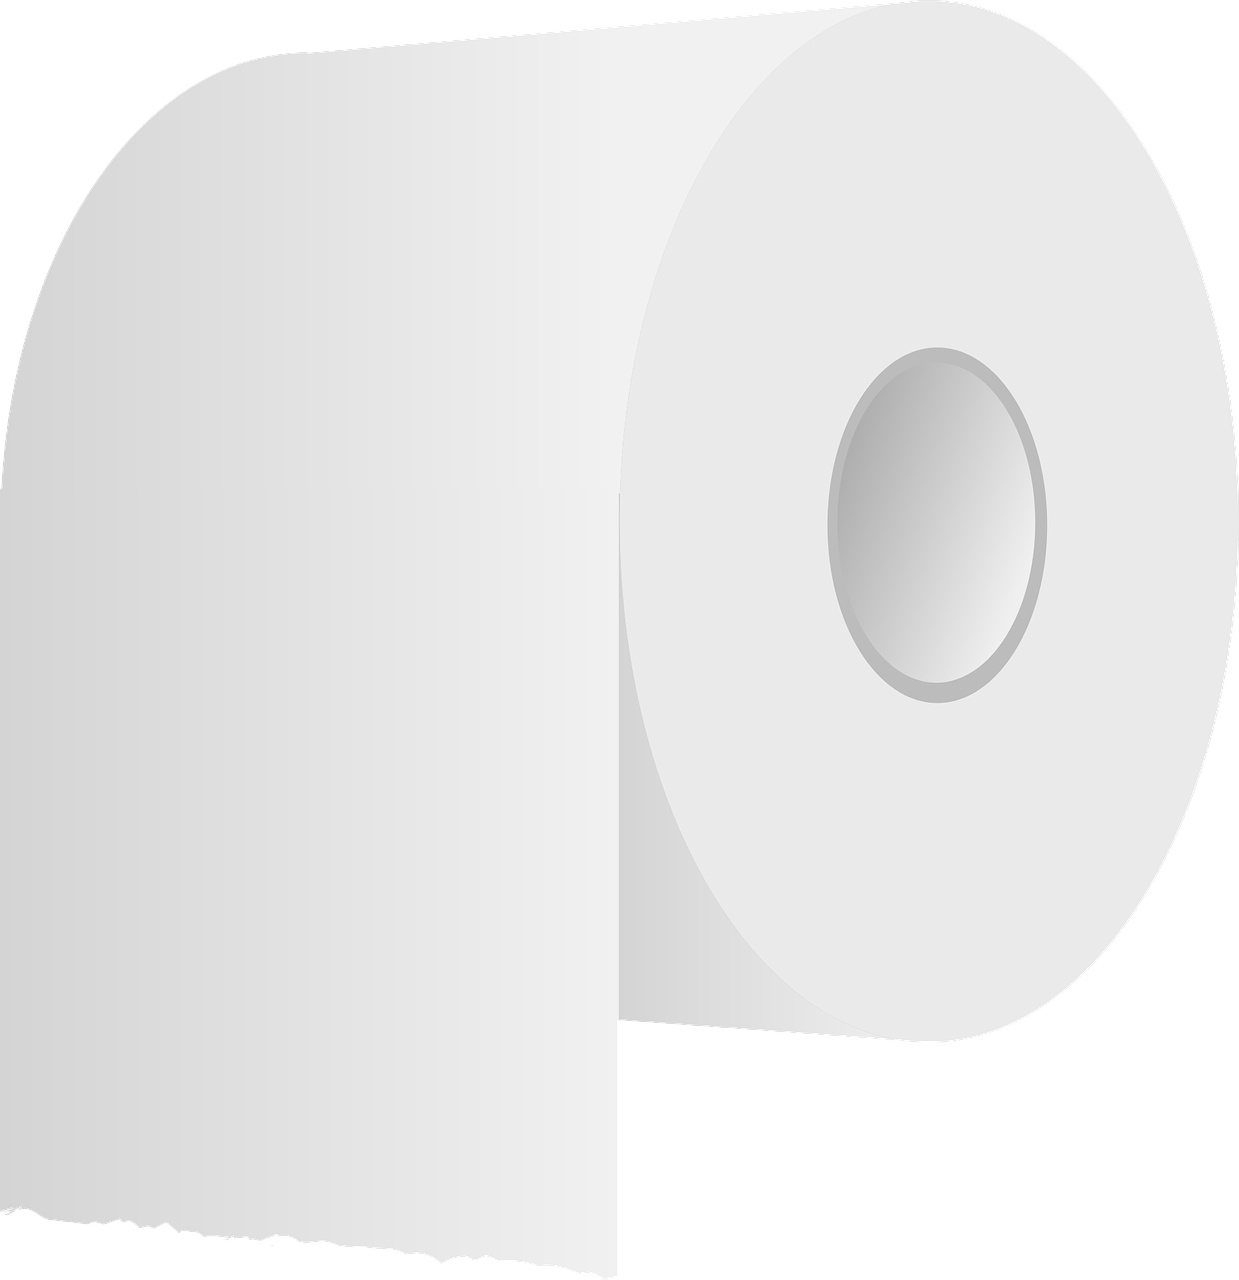 One Piece Tankless Toilet Review